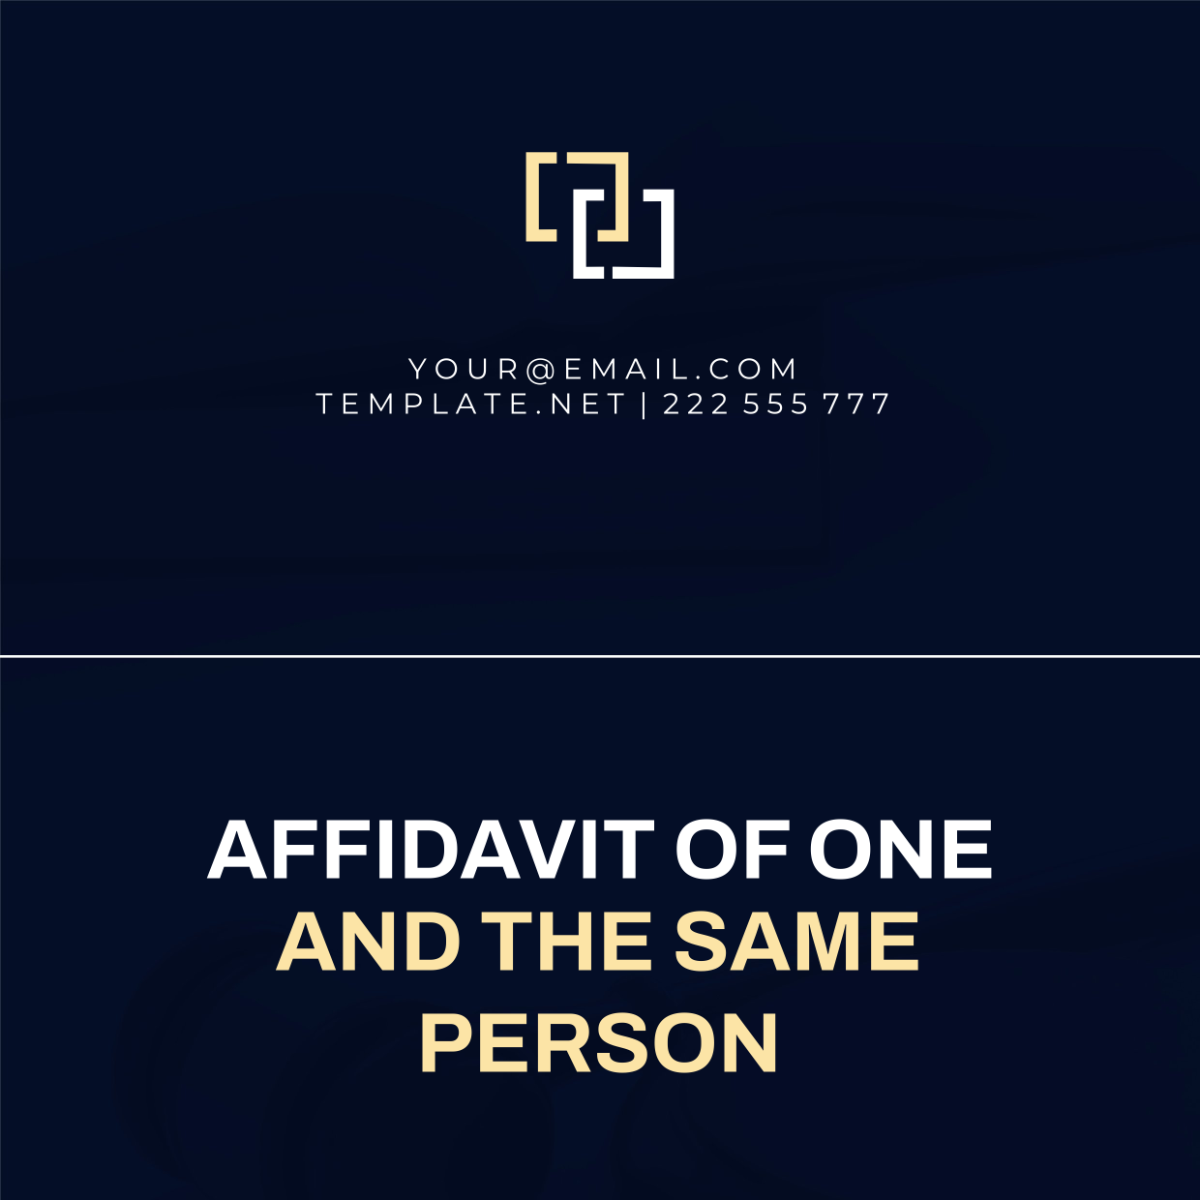 Affidavit of One and the Same Person Template